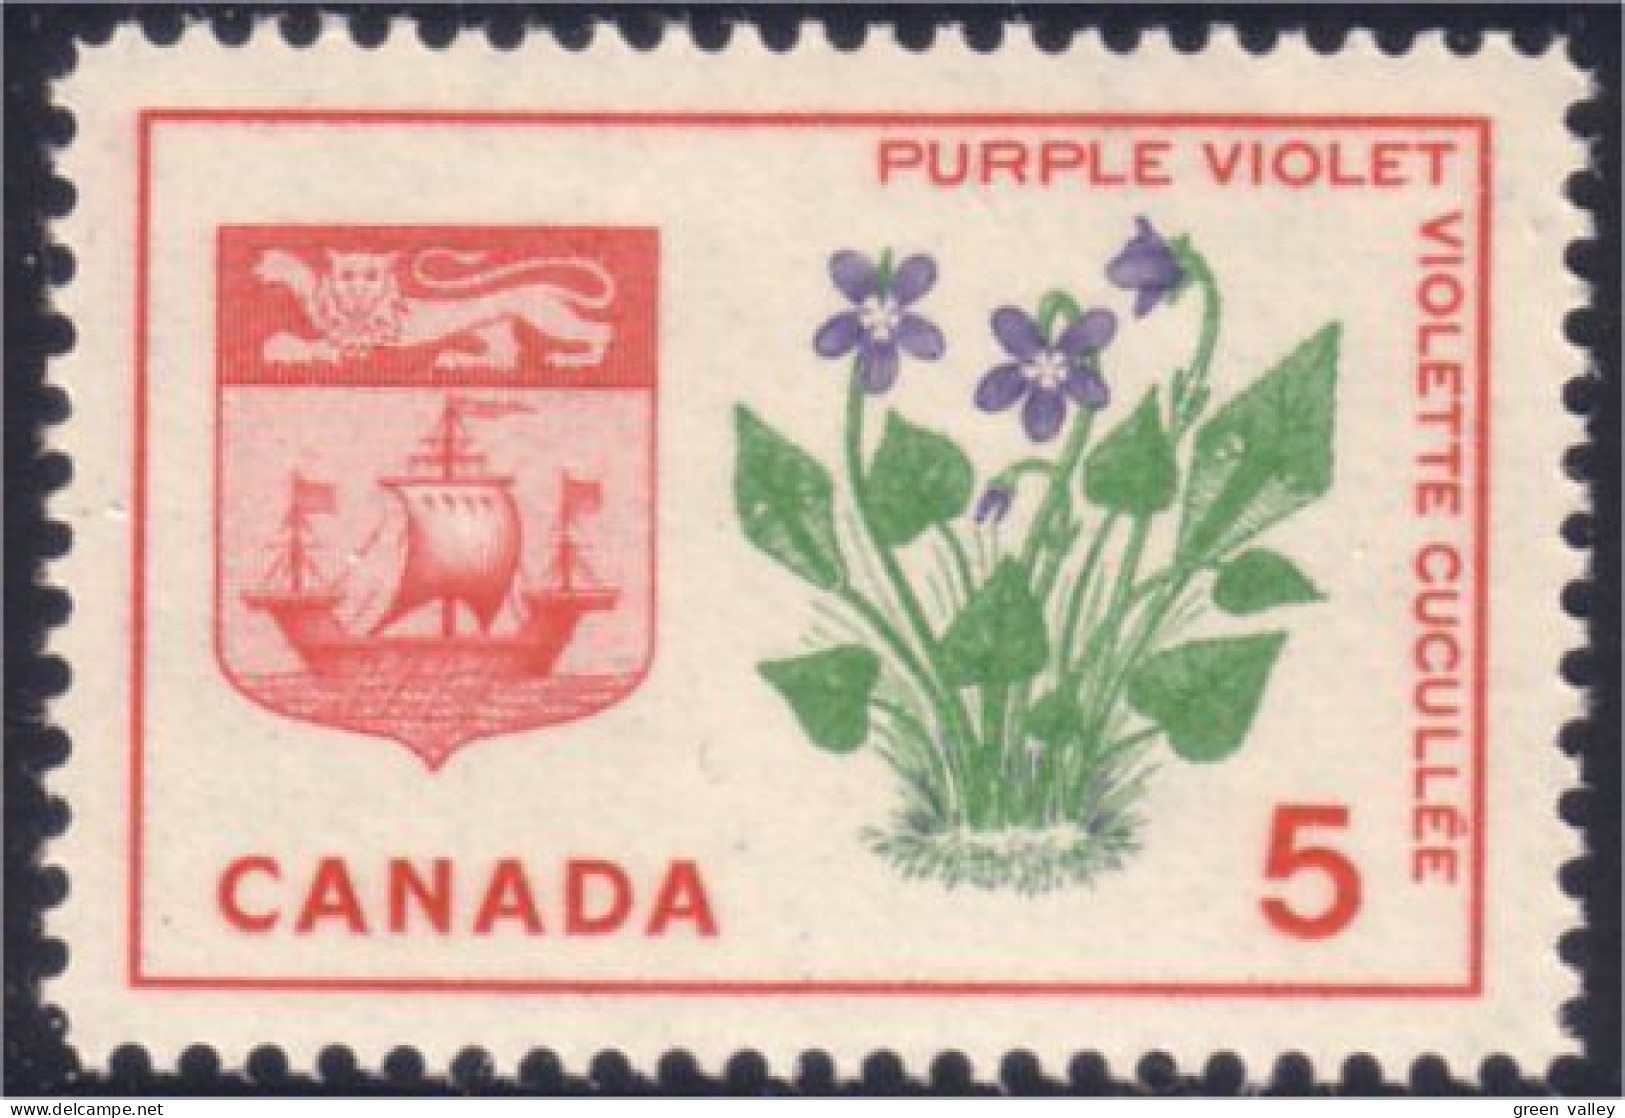 Canada Purple Violet Violette Armoiries Coat Of Arms MNH ** Neuf SC (04-21c) - Sellos